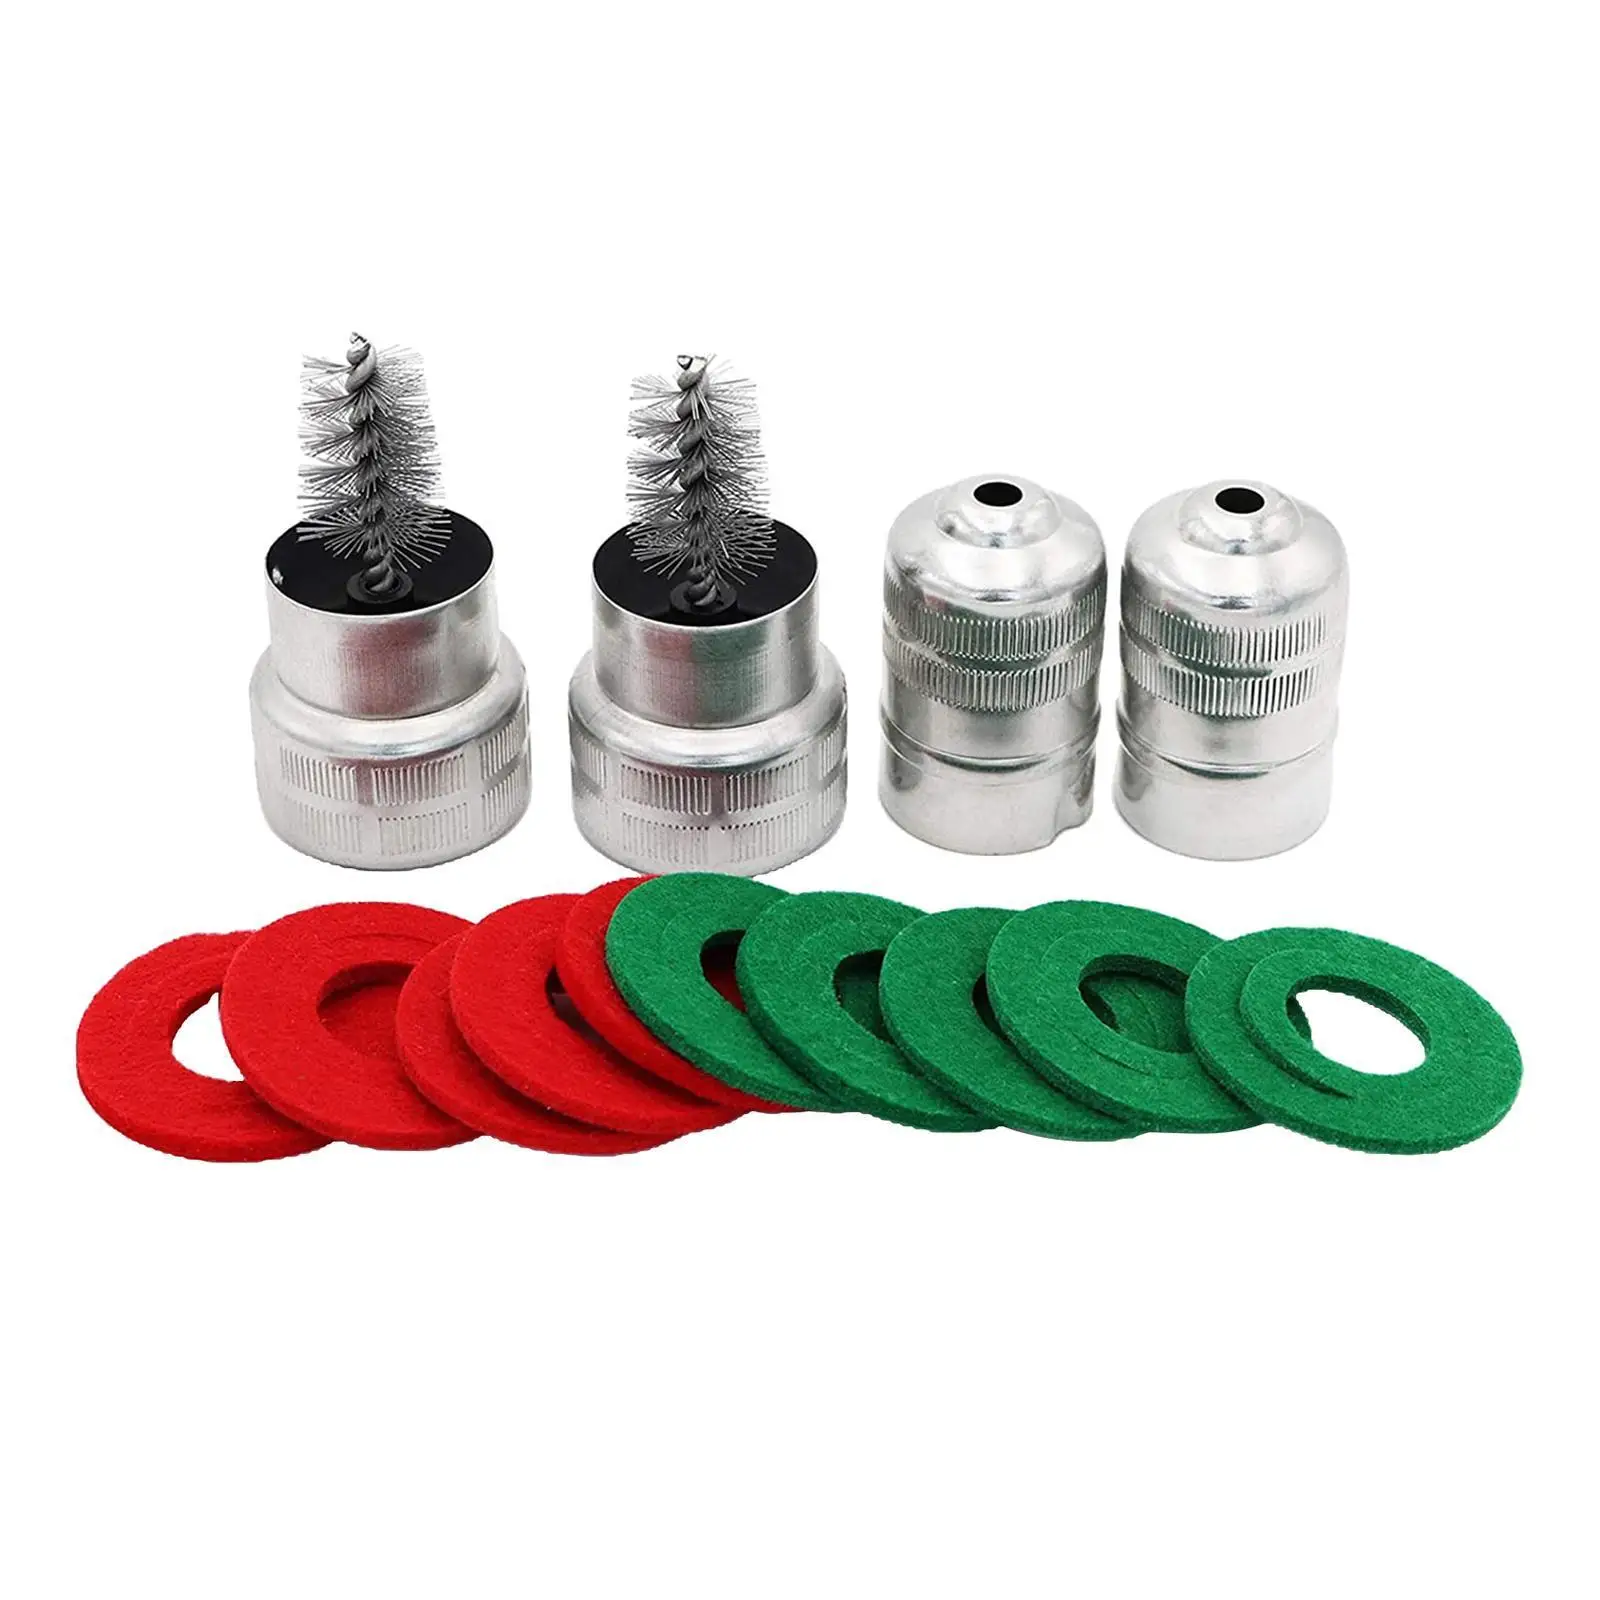 12pcs Battery Terminal Anti Corrosion Washers and Cleaning Brush 2pcs for car marine boat